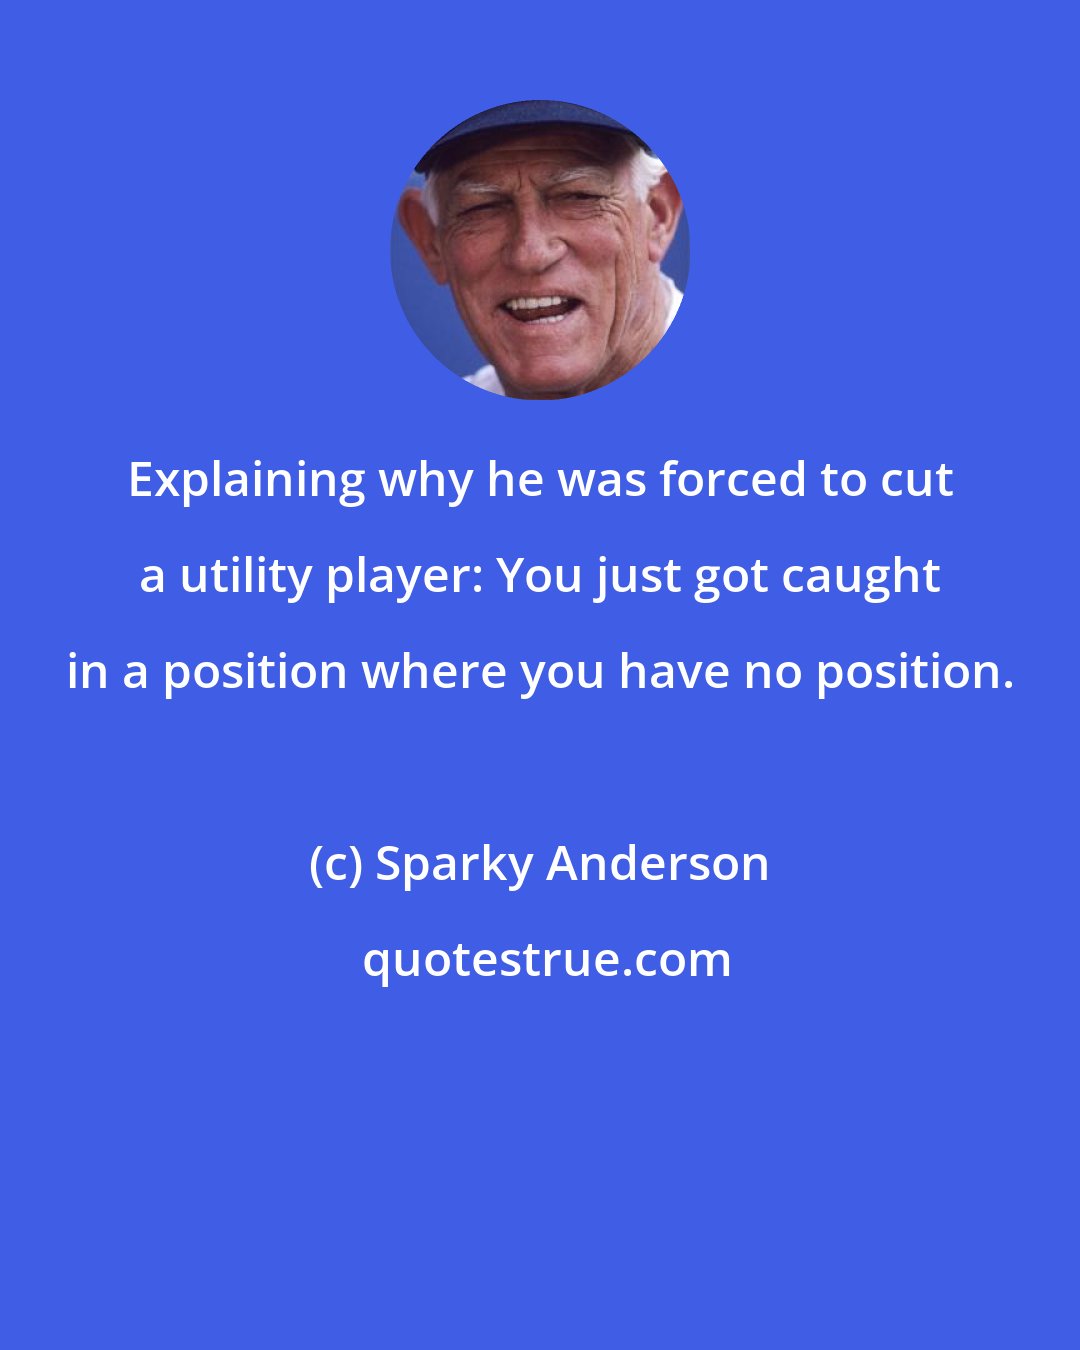 Sparky Anderson: Explaining why he was forced to cut a utility player: You just got caught in a position where you have no position.